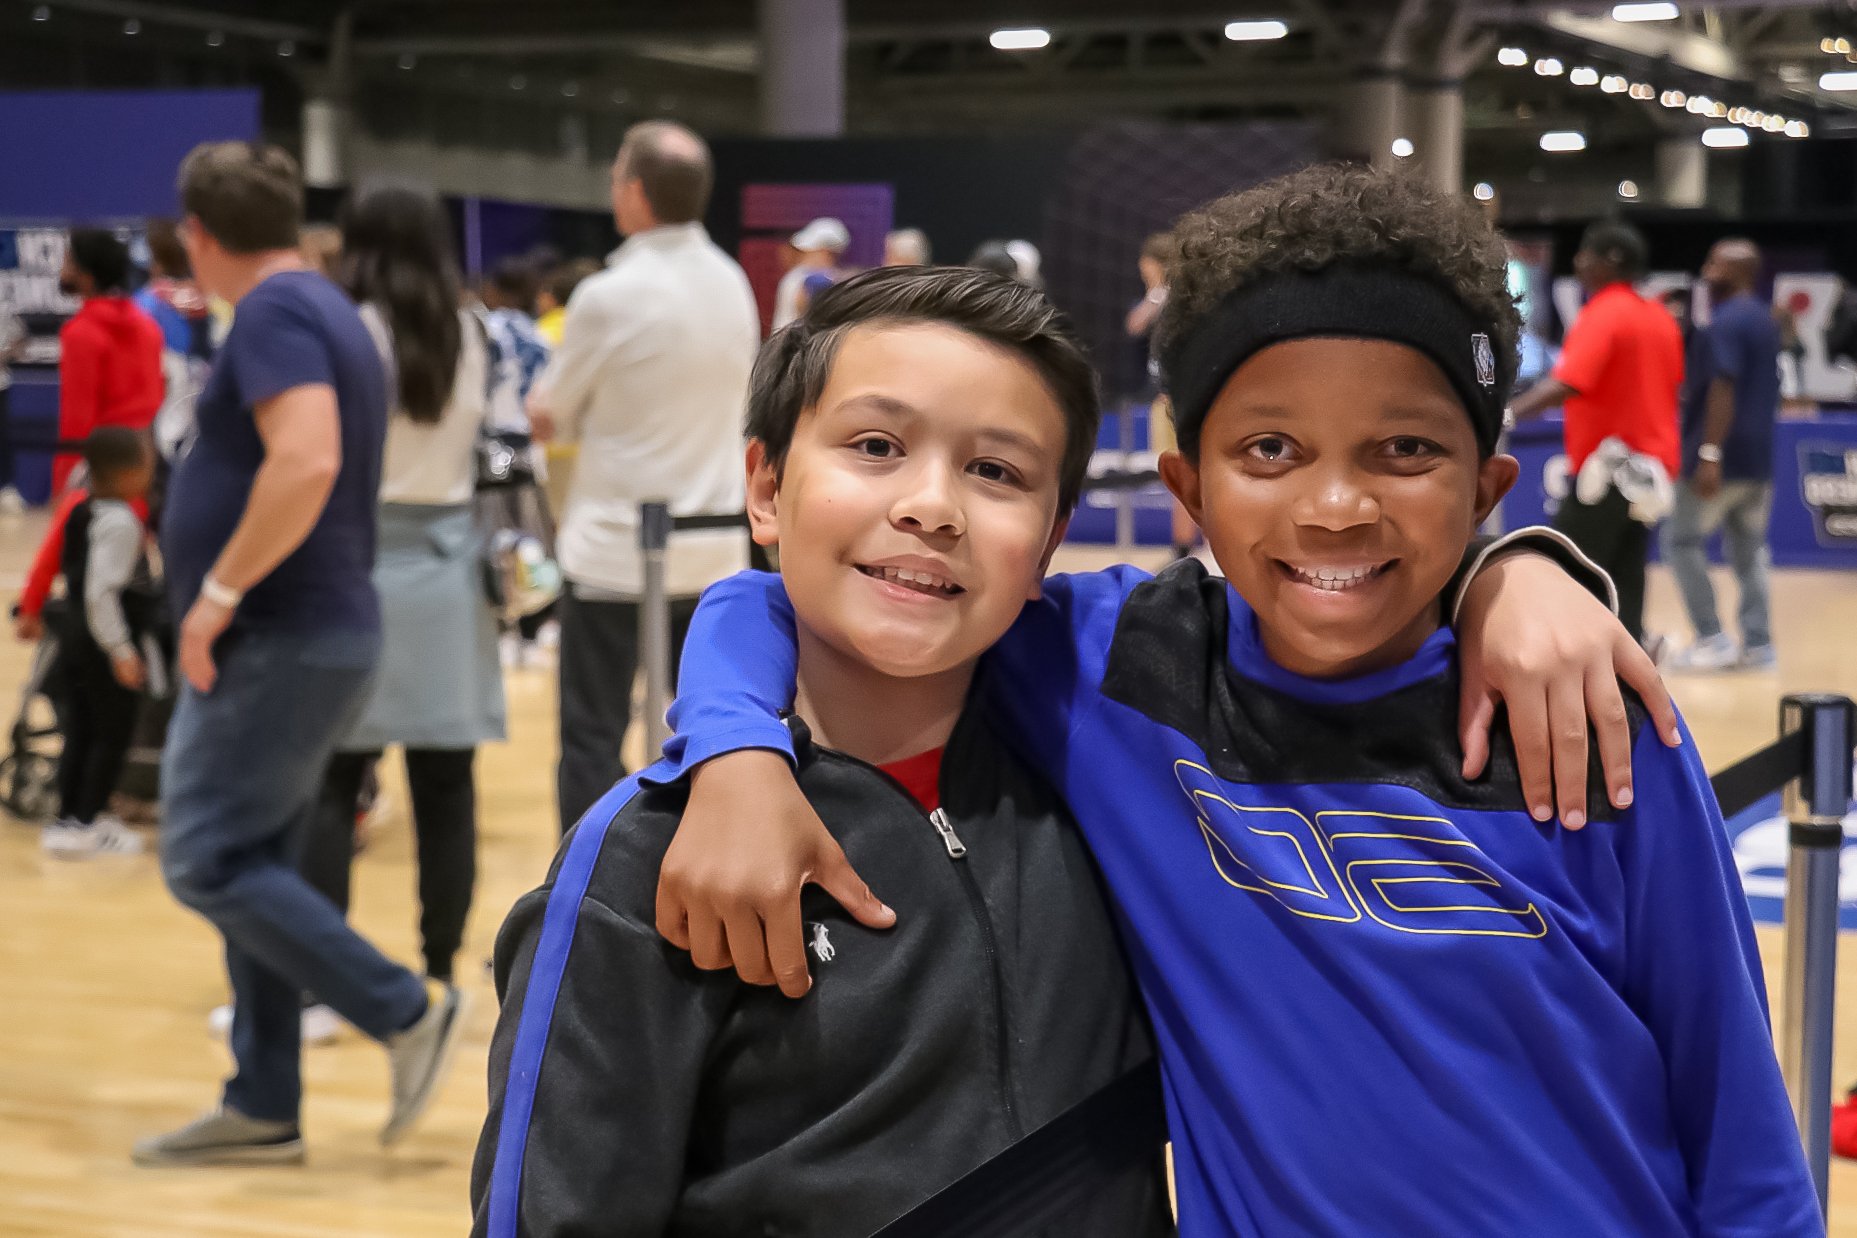 Two child age boys pose for the camera wearing matching athletic gear. The boy on the left is Hispanic while the boy on the left is black